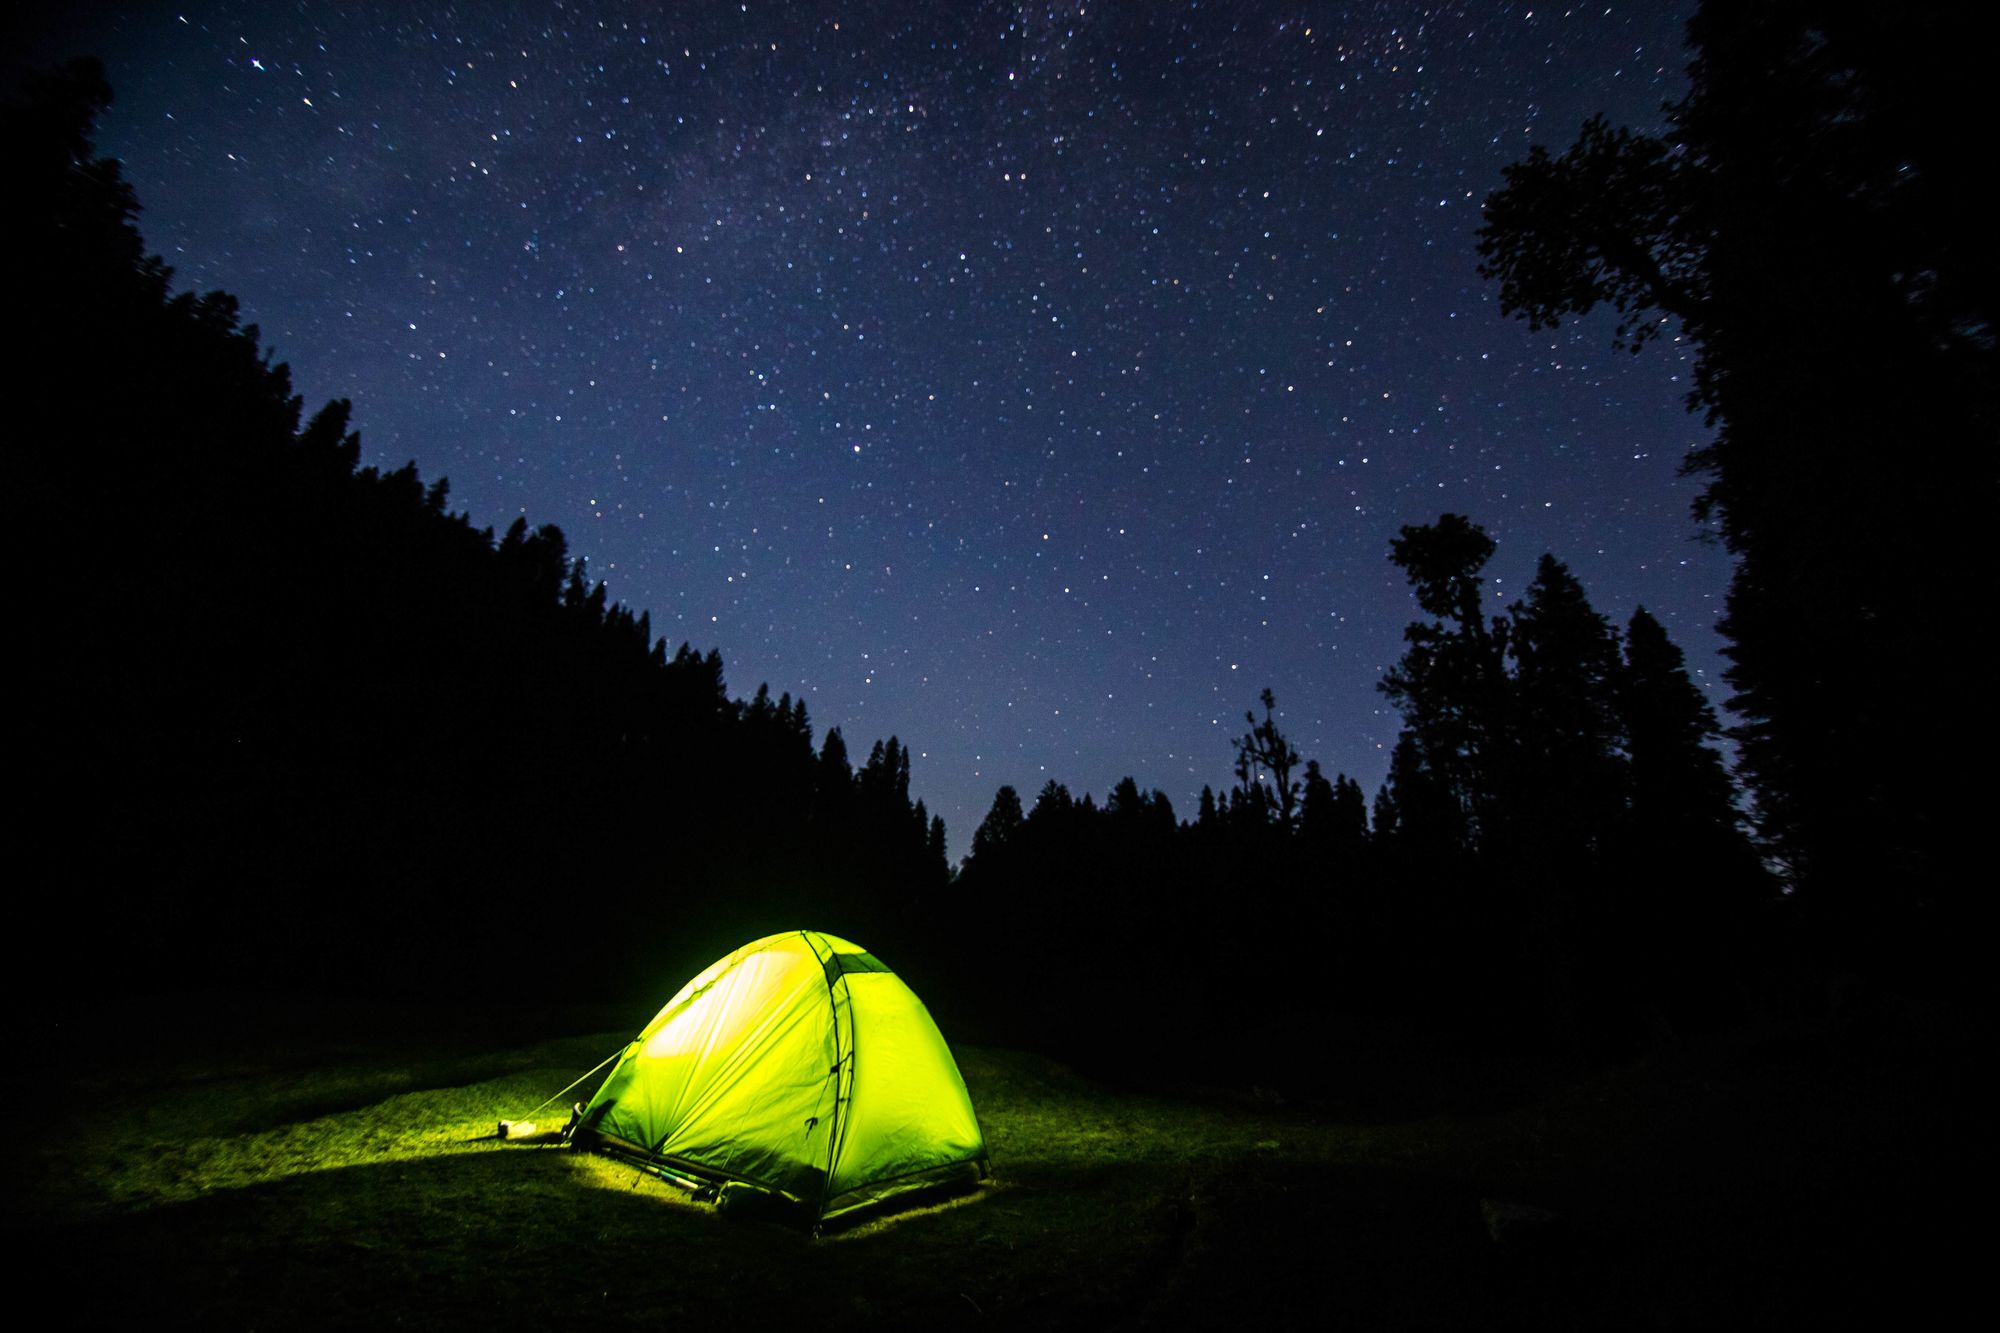 light emits from a green tent set underneath the starry sky surrounded by silhouettes of trees